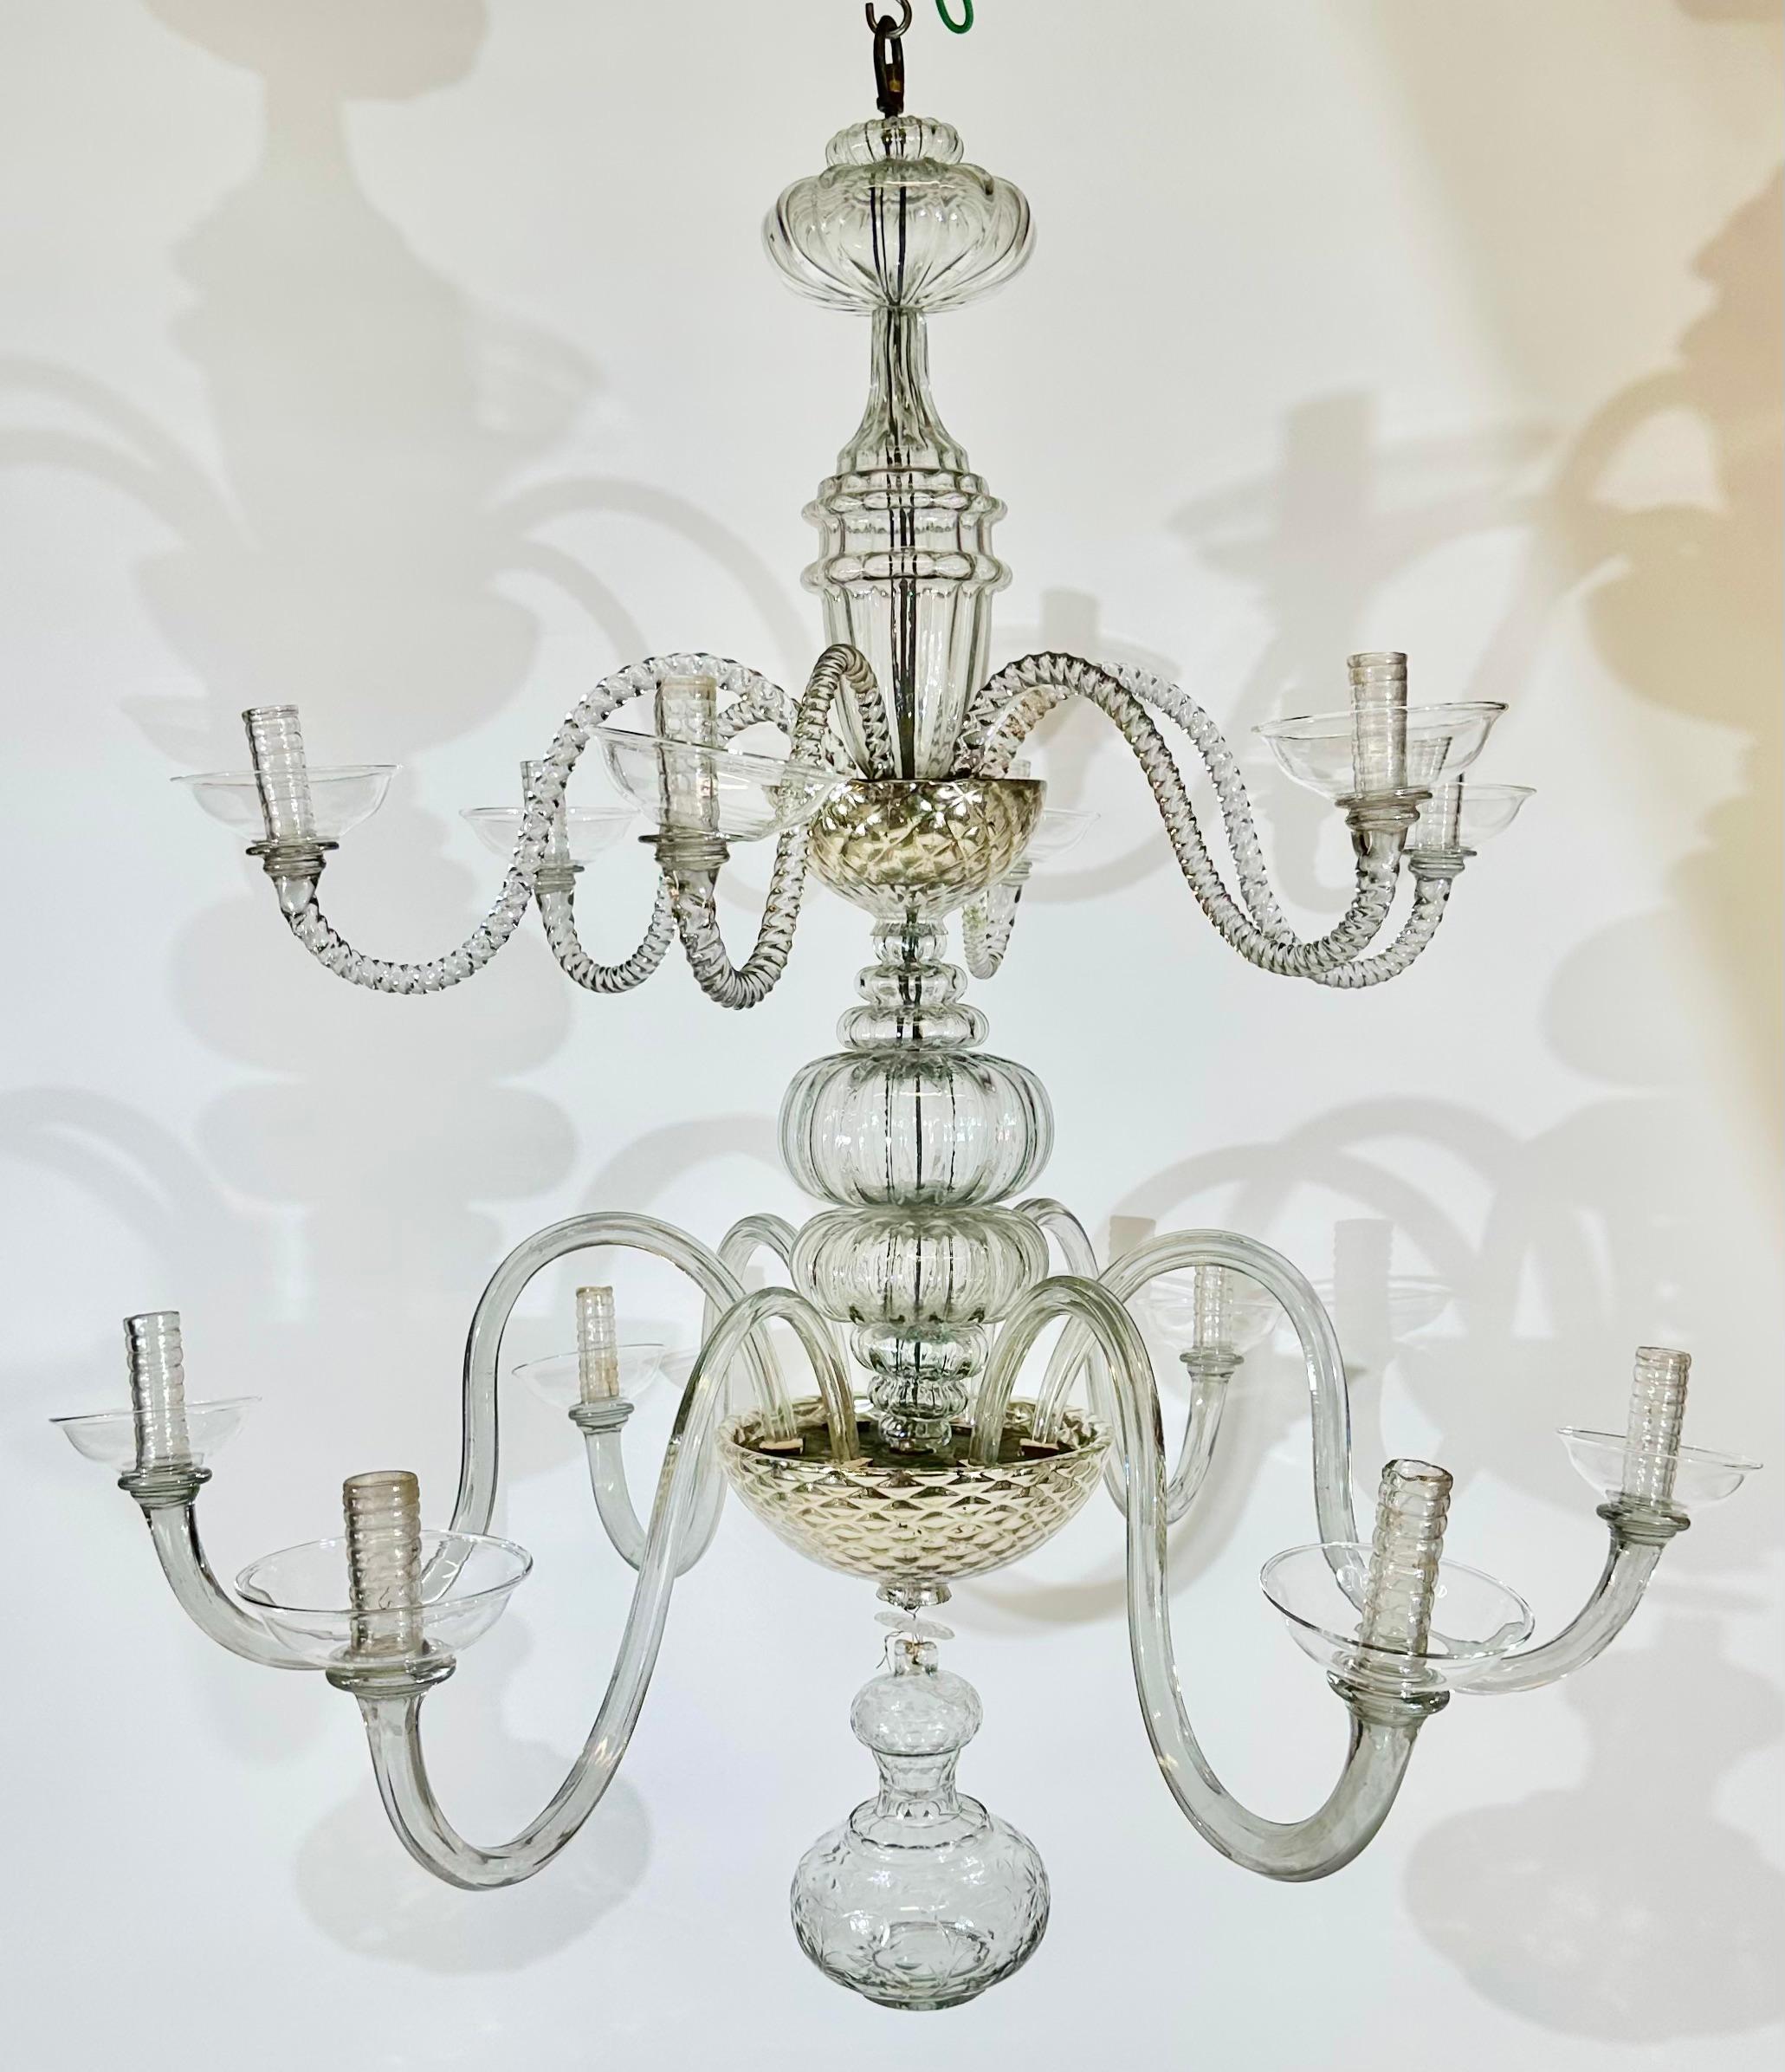 This is large chandelier of this type with its candlers on two levels. This type of chandeliers were made in several countries during the 18th c. This one is probably English but could also be mideuropean. There are very similar chandeliers depicted